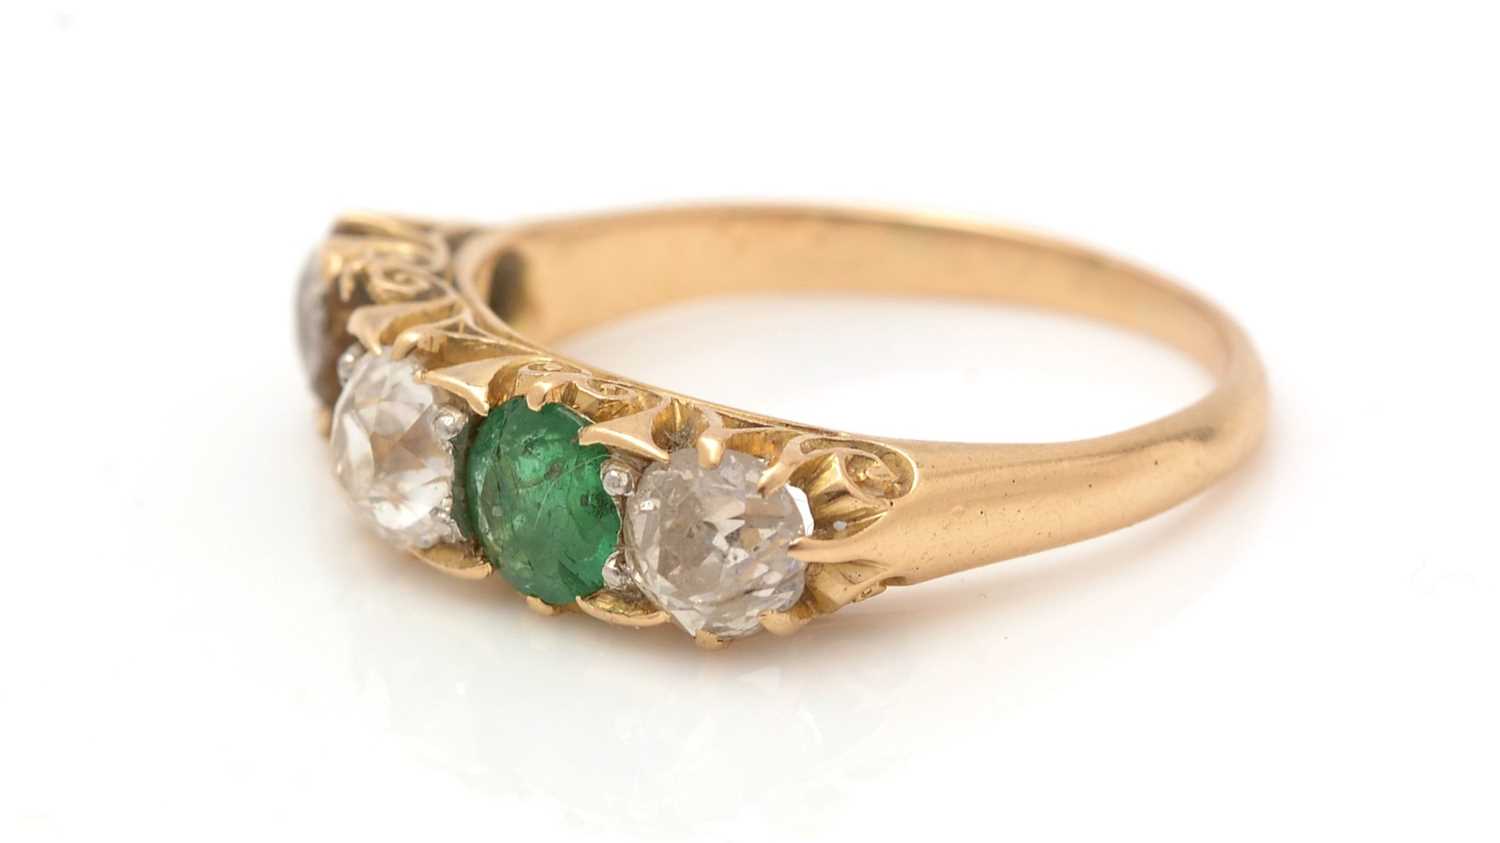 Lot 408 - An emerald and diamond ring